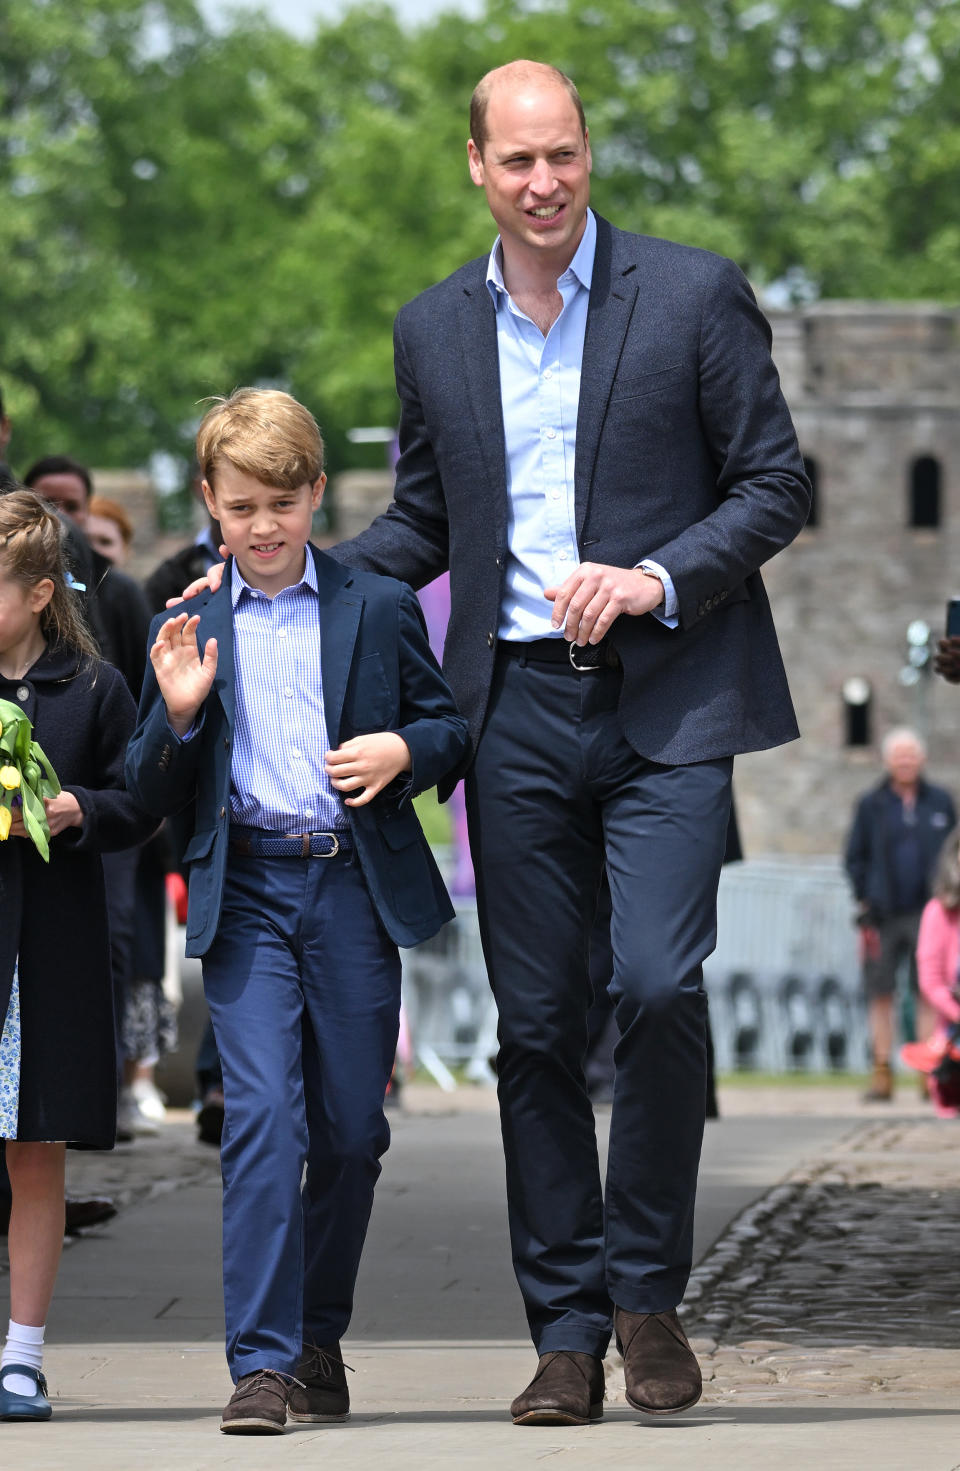 The royal father and son also visited Cardiff Castle in Wales earlier in the day. (Getty Images)
